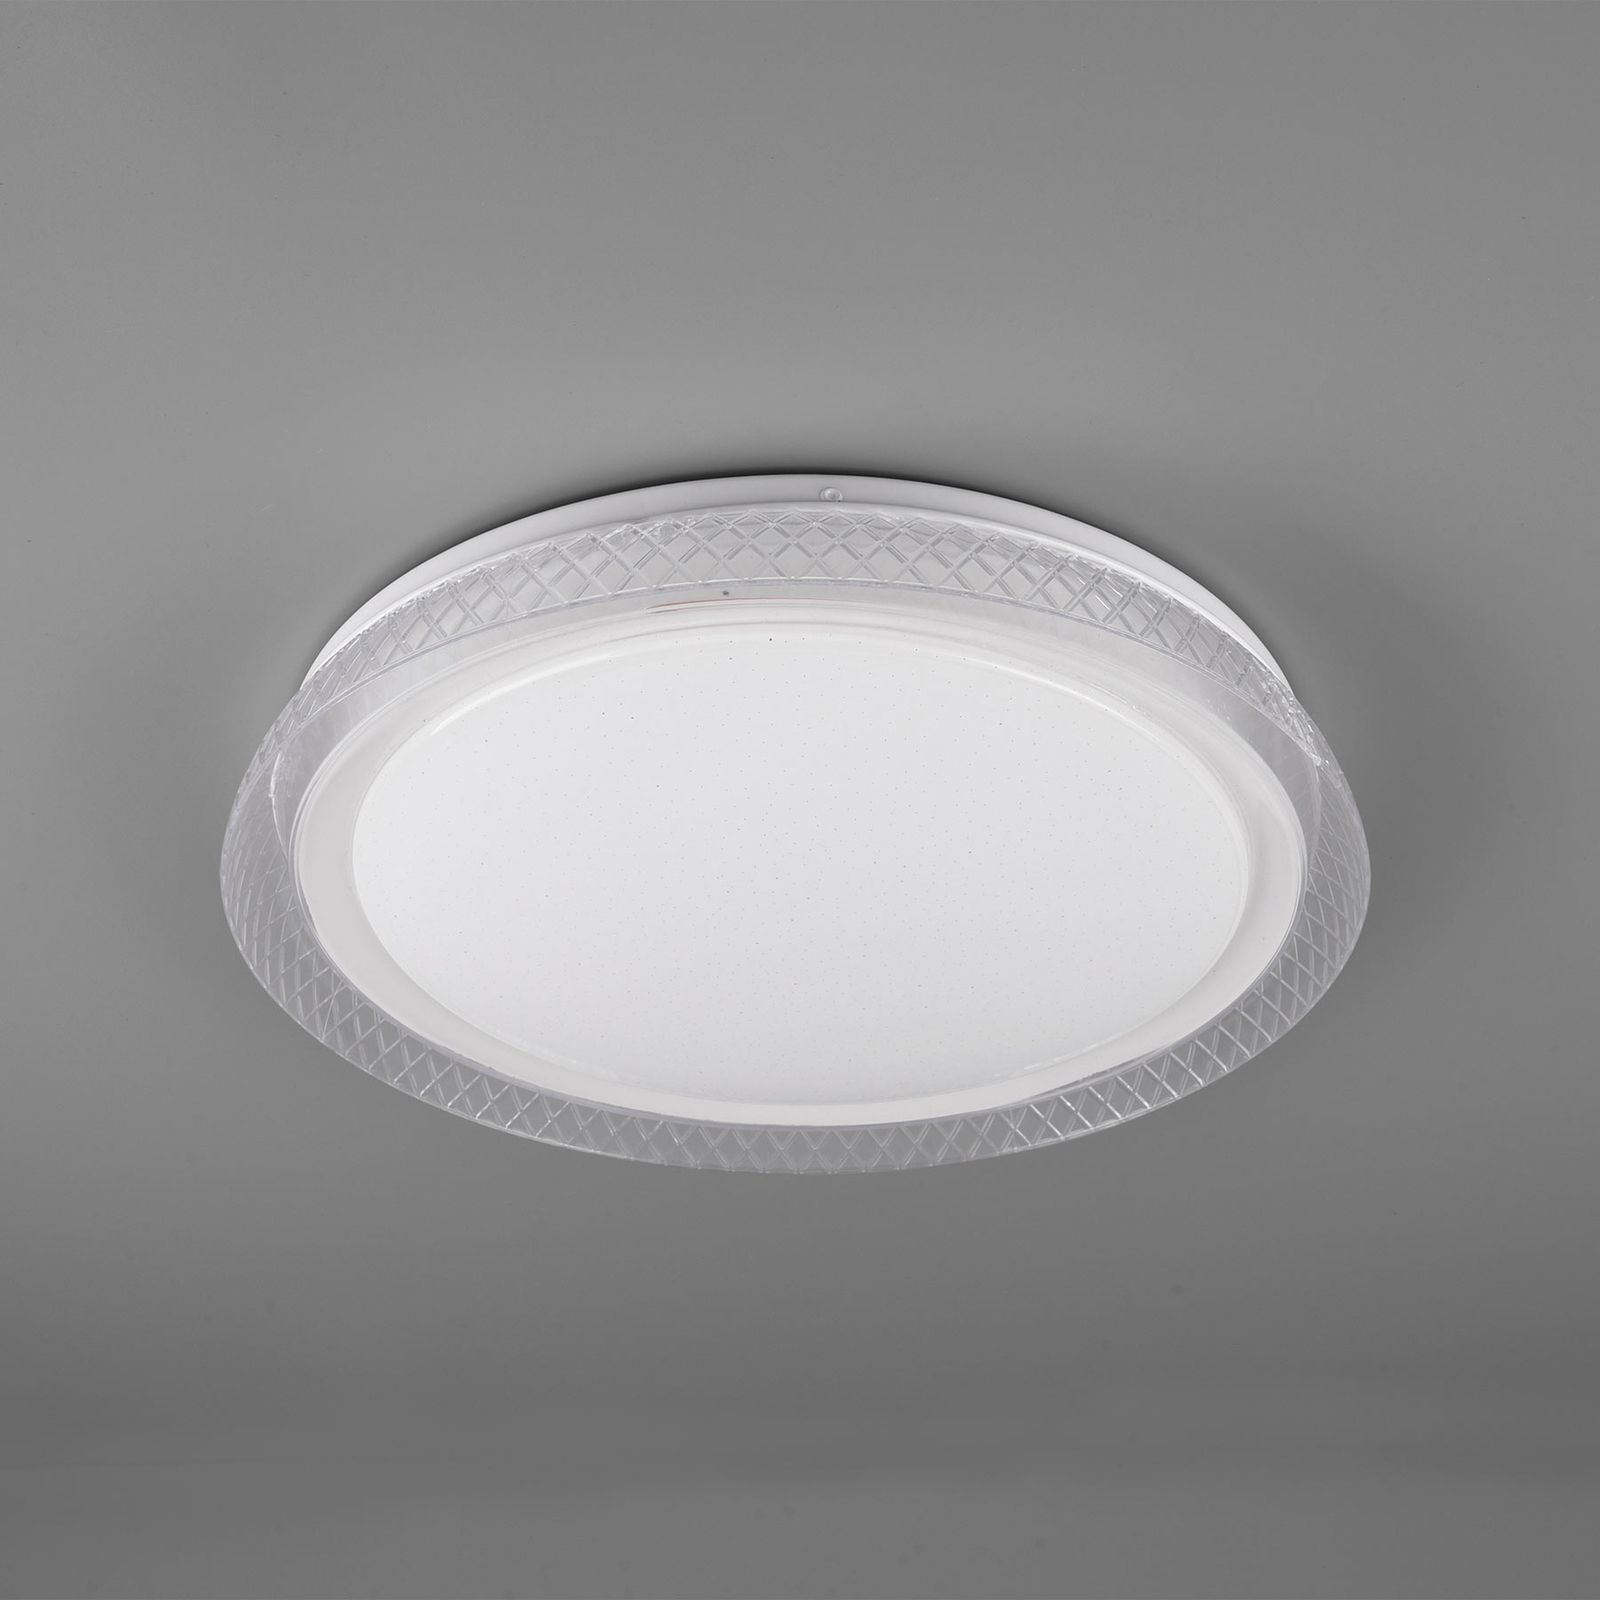 LED-taklampa Heracles, tunable white, Ø 38 cm